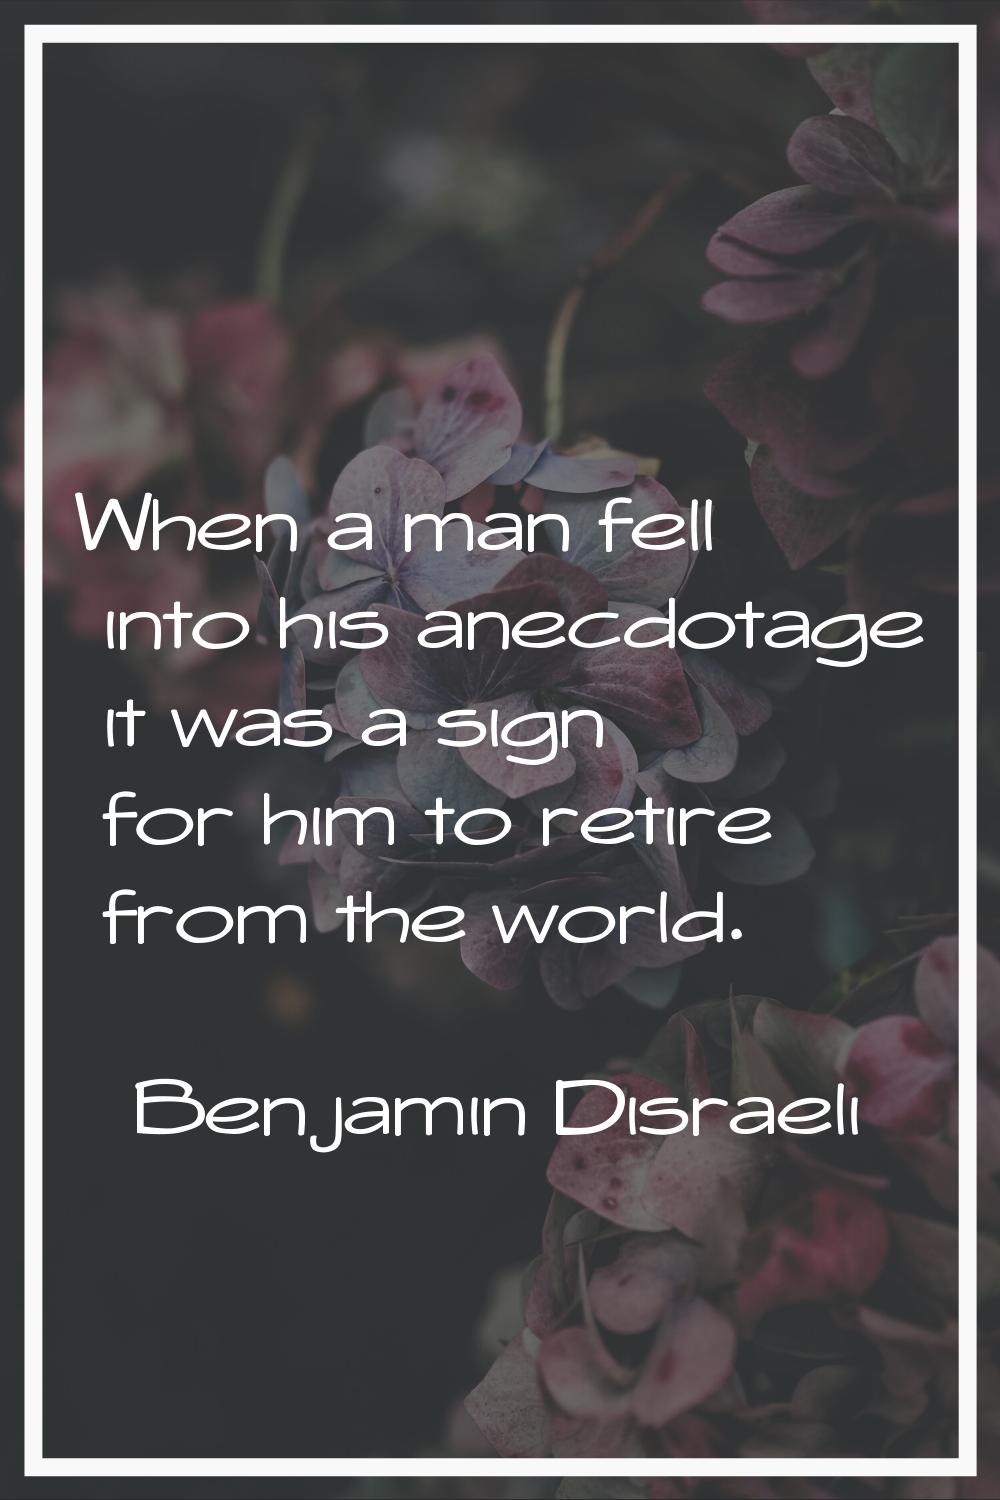 When a man fell into his anecdotage it was a sign for him to retire from the world.